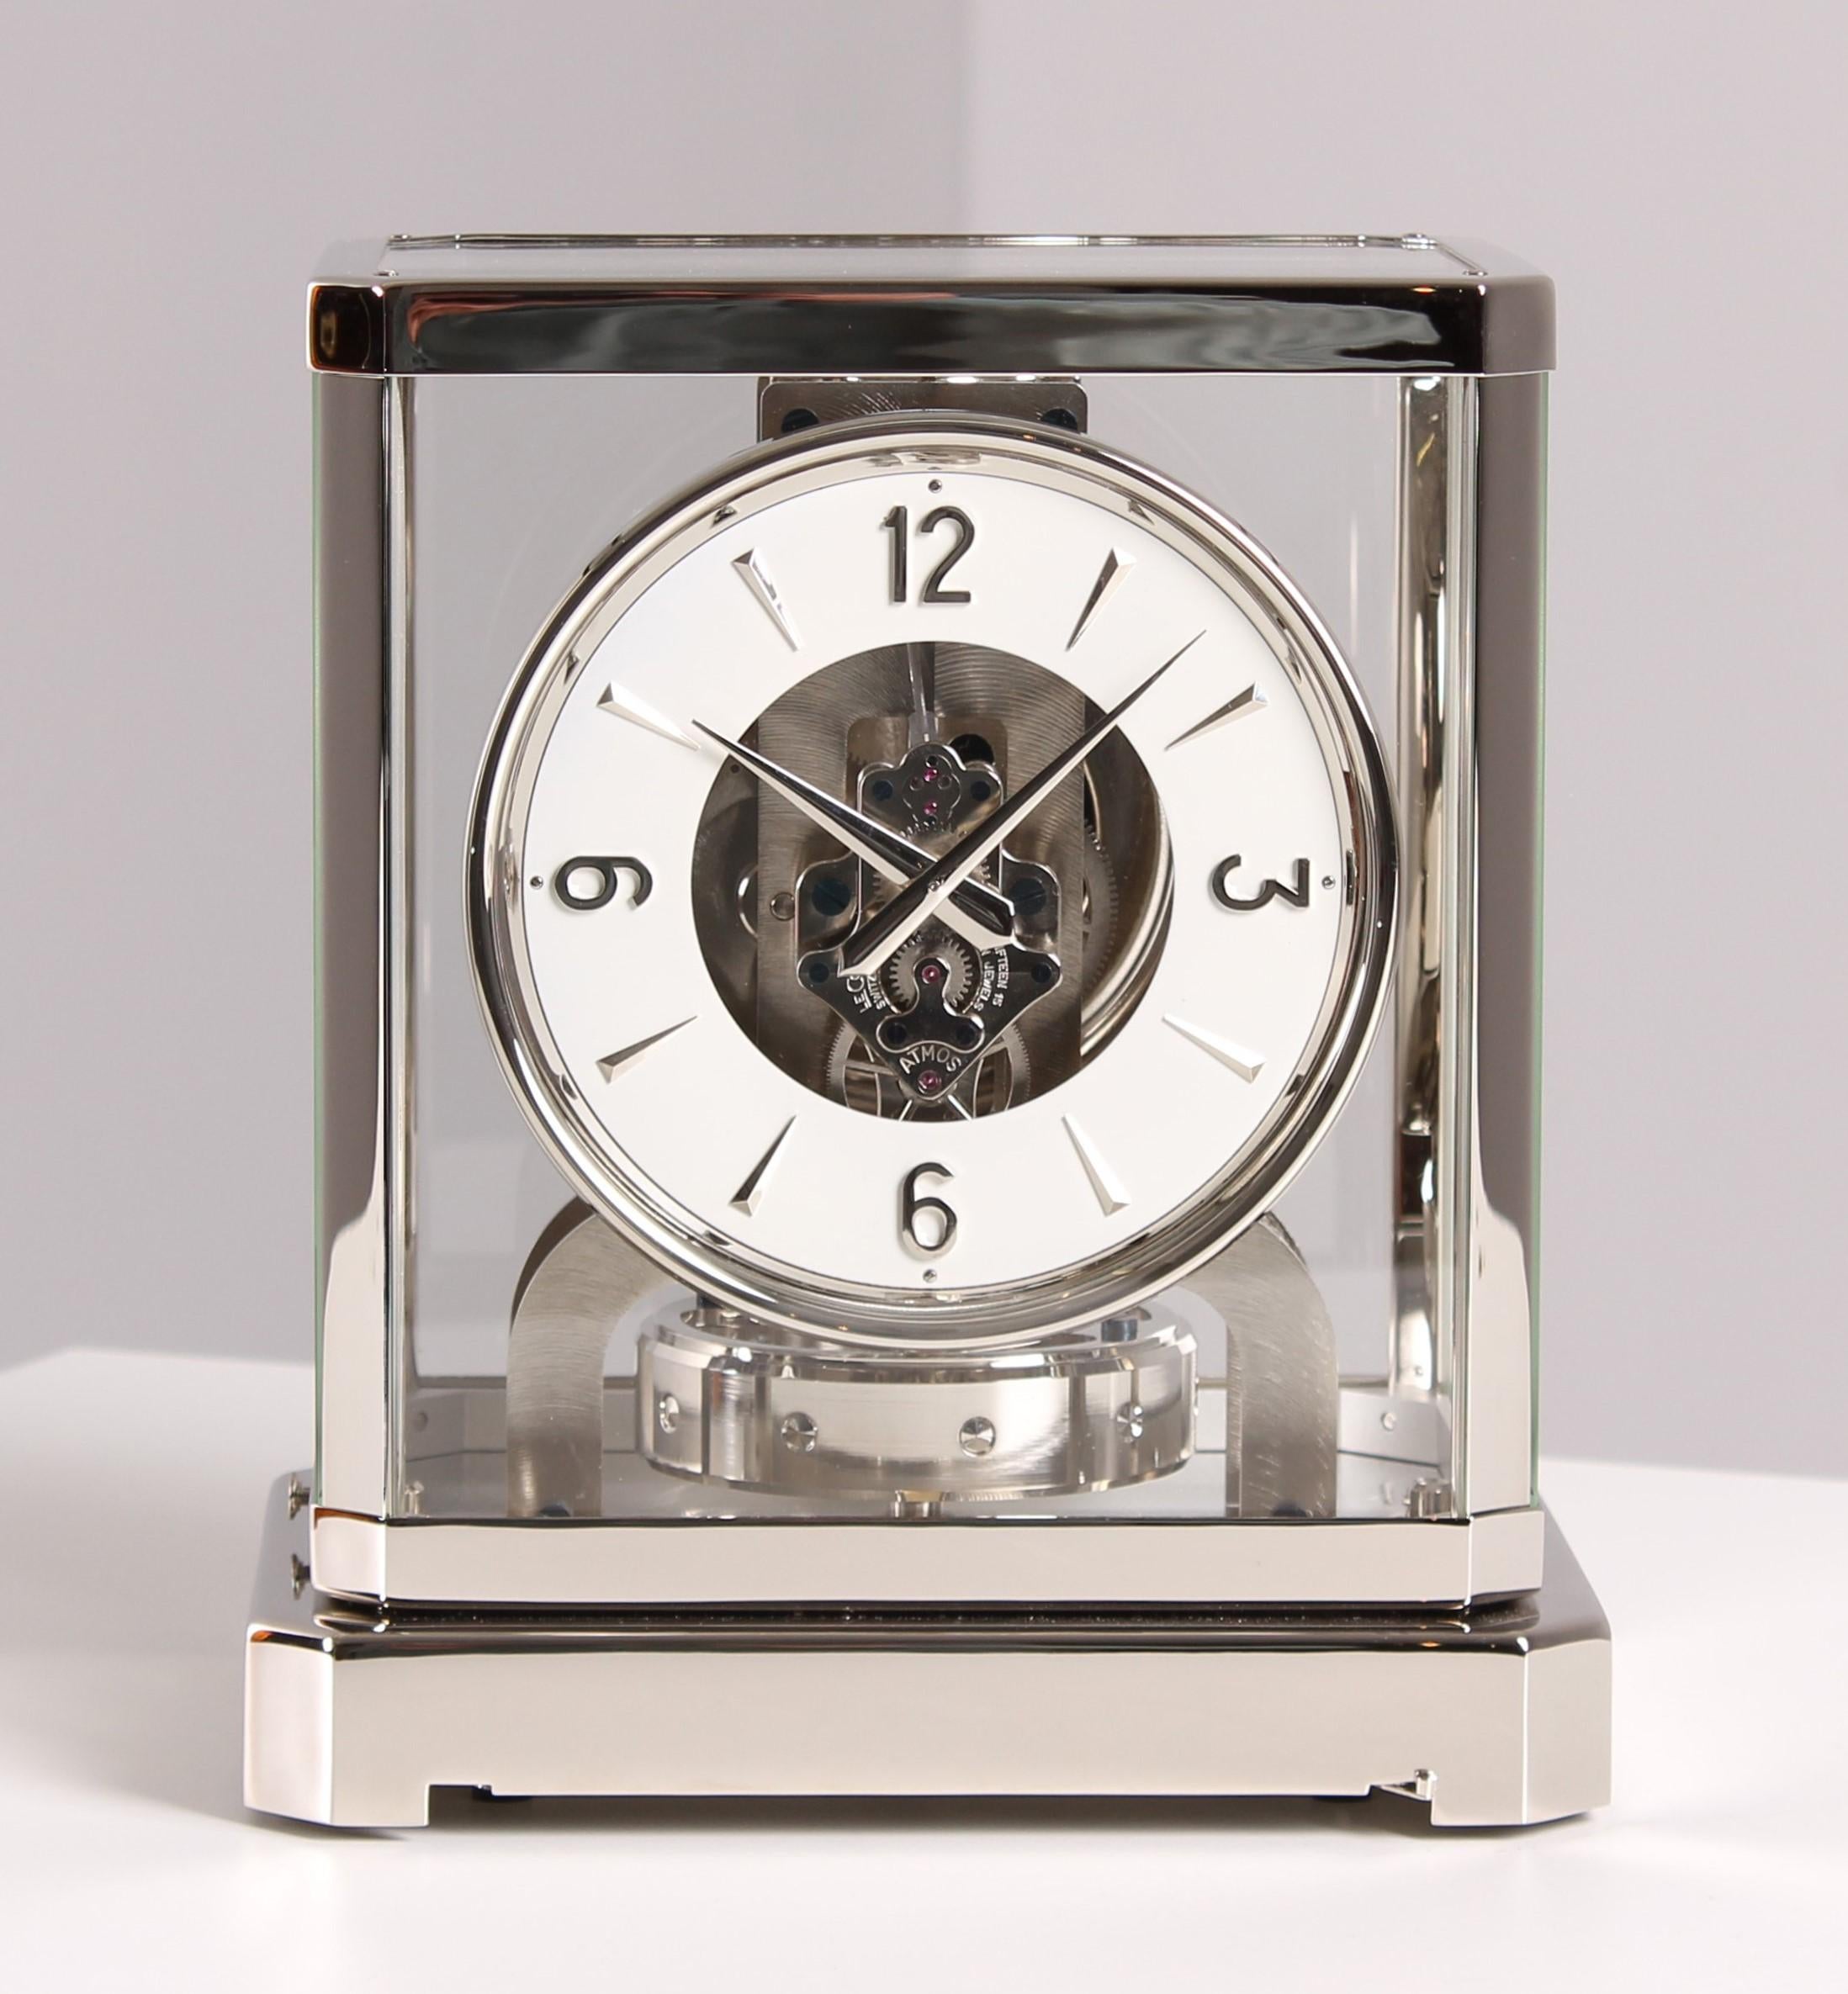 Atmos II from Jaeger LeCoultre

Switzerland
Nickel-plated brass
Year of manufacture 1950

Dimensions: H x W x D: 23.5 x 21 x 16.5 cm

Description:
Atmos II in a new nickel-plated case. Removable glass bell, blued screws, rotating pendulum with small